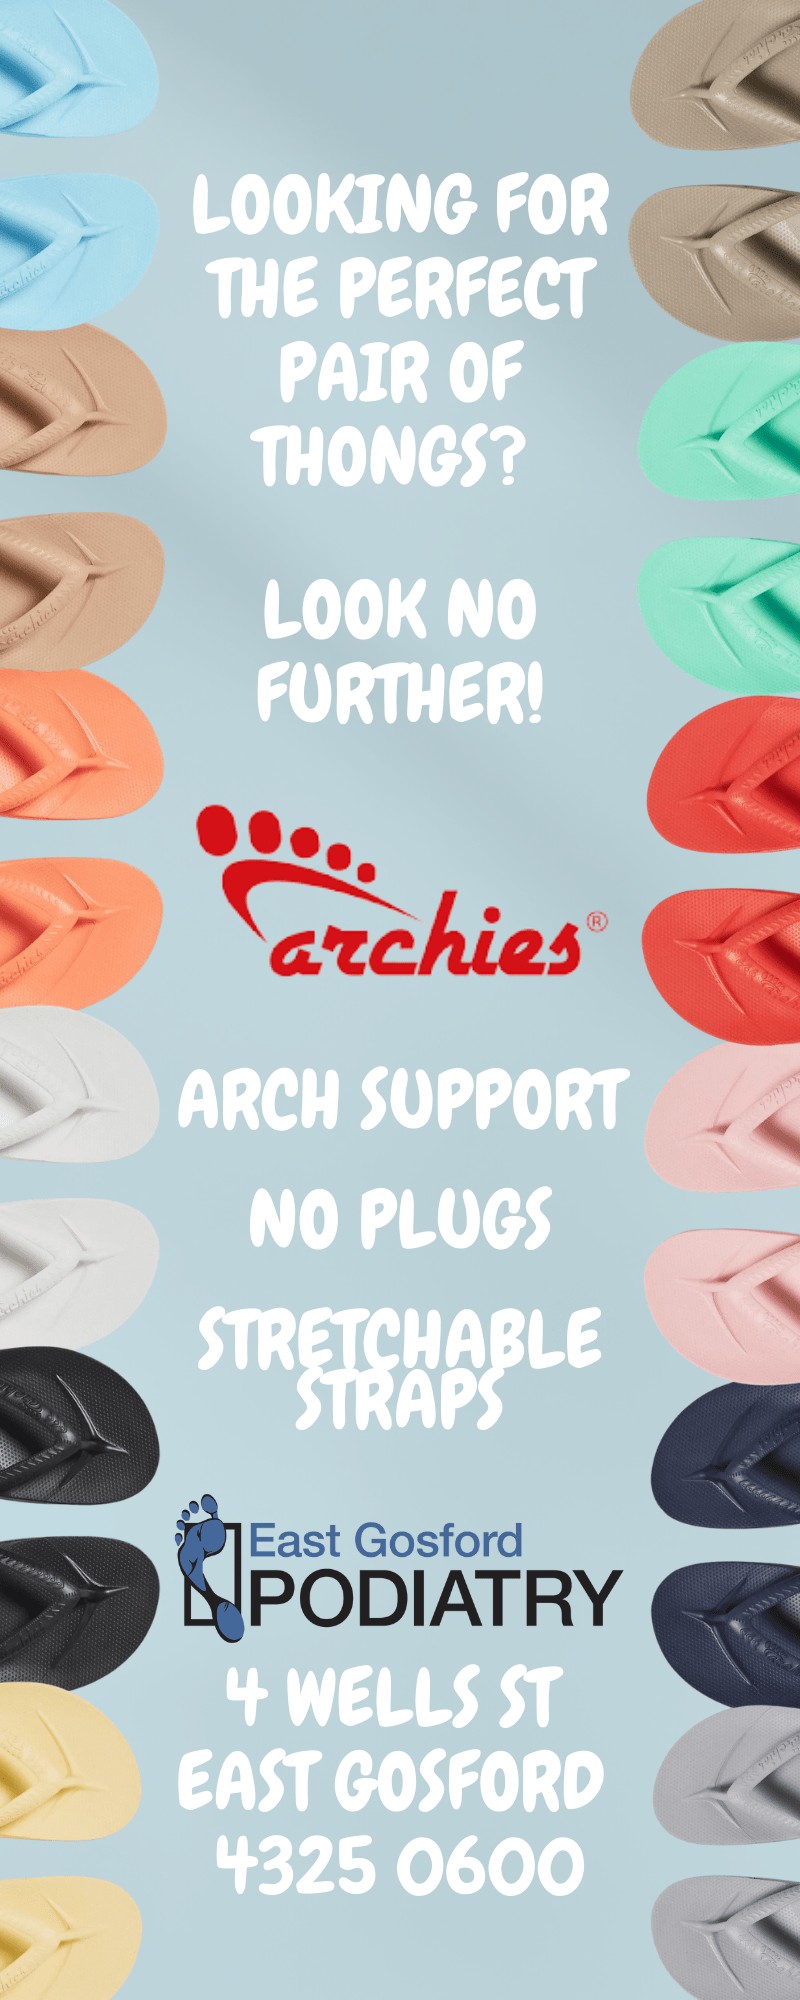 Why You Should Get a Pair of Archies Thongs